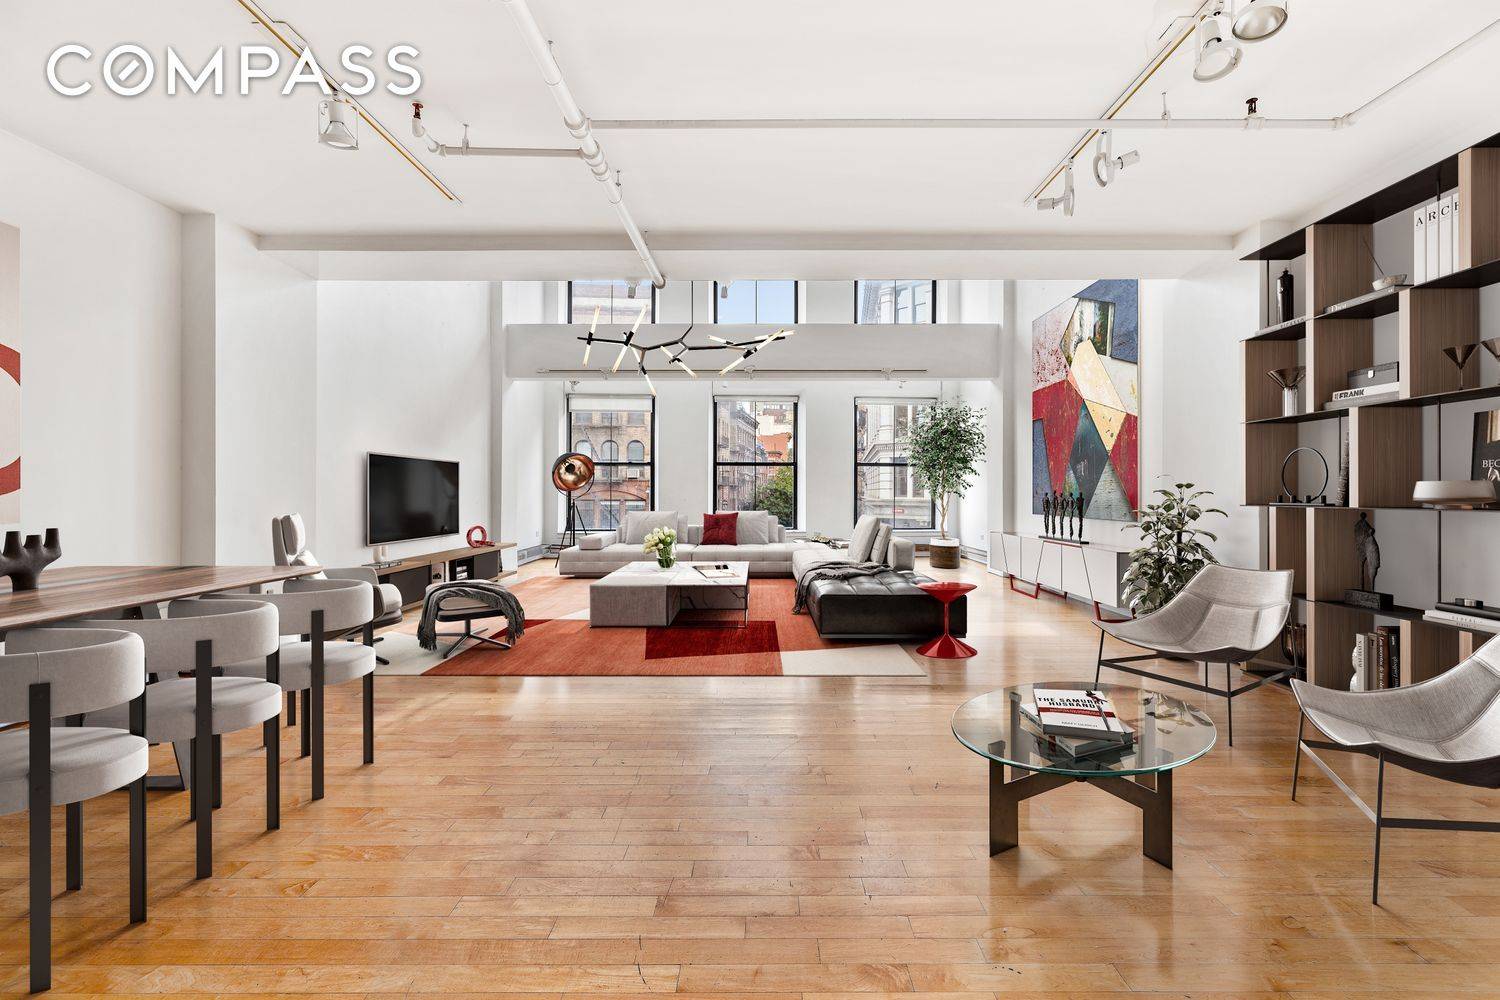 With a view looking directly down Spring Street, this 2, 177 SF full floor loft provides the perfect open floor living space, currently in white box condition configured as a ...